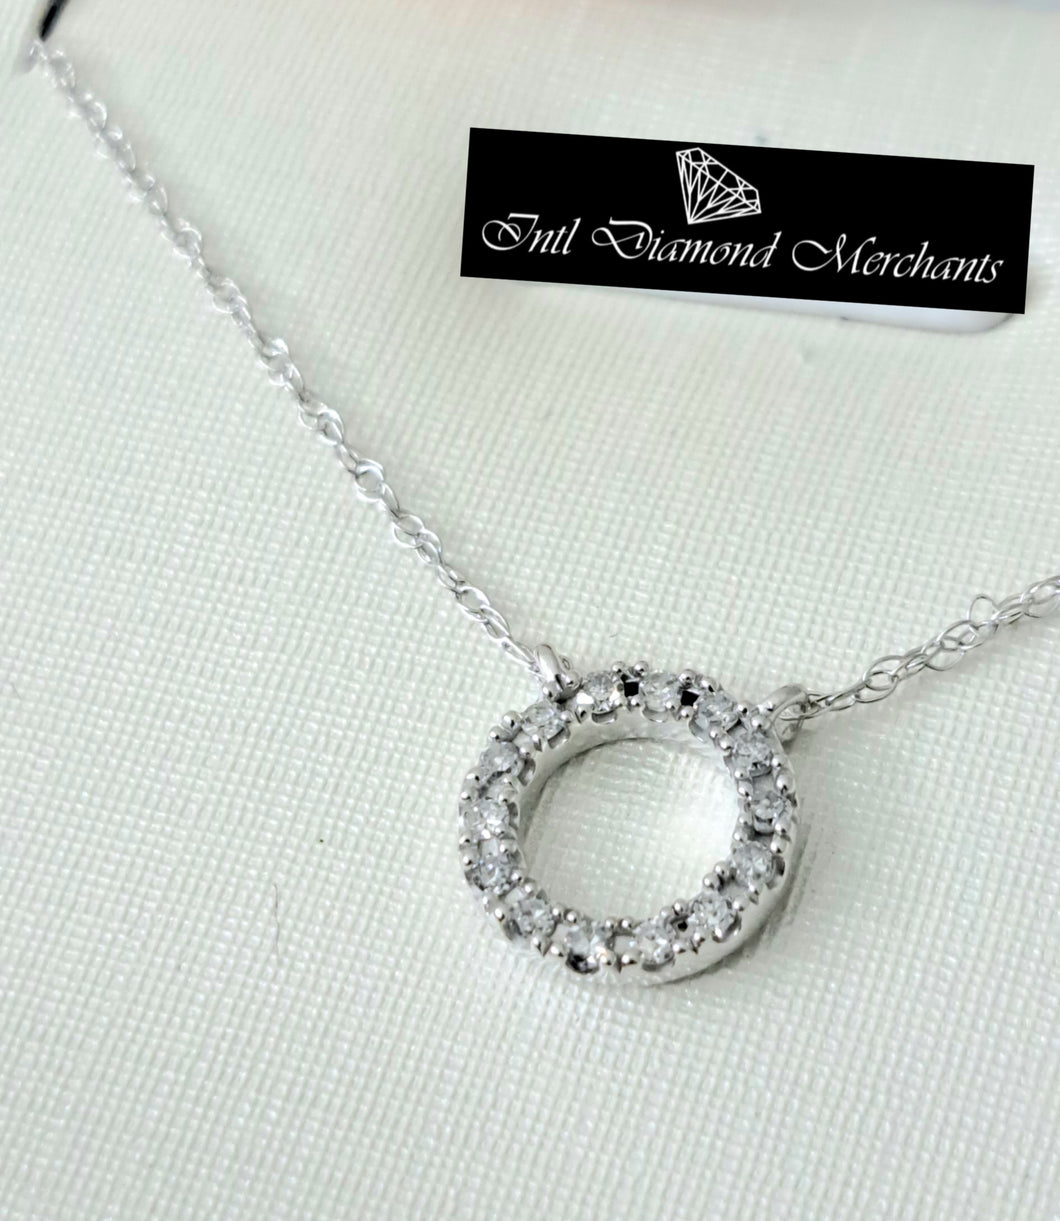 0.10cts Round Cut Diamonds | Halo Pendant with Chain | 10kt White Gold